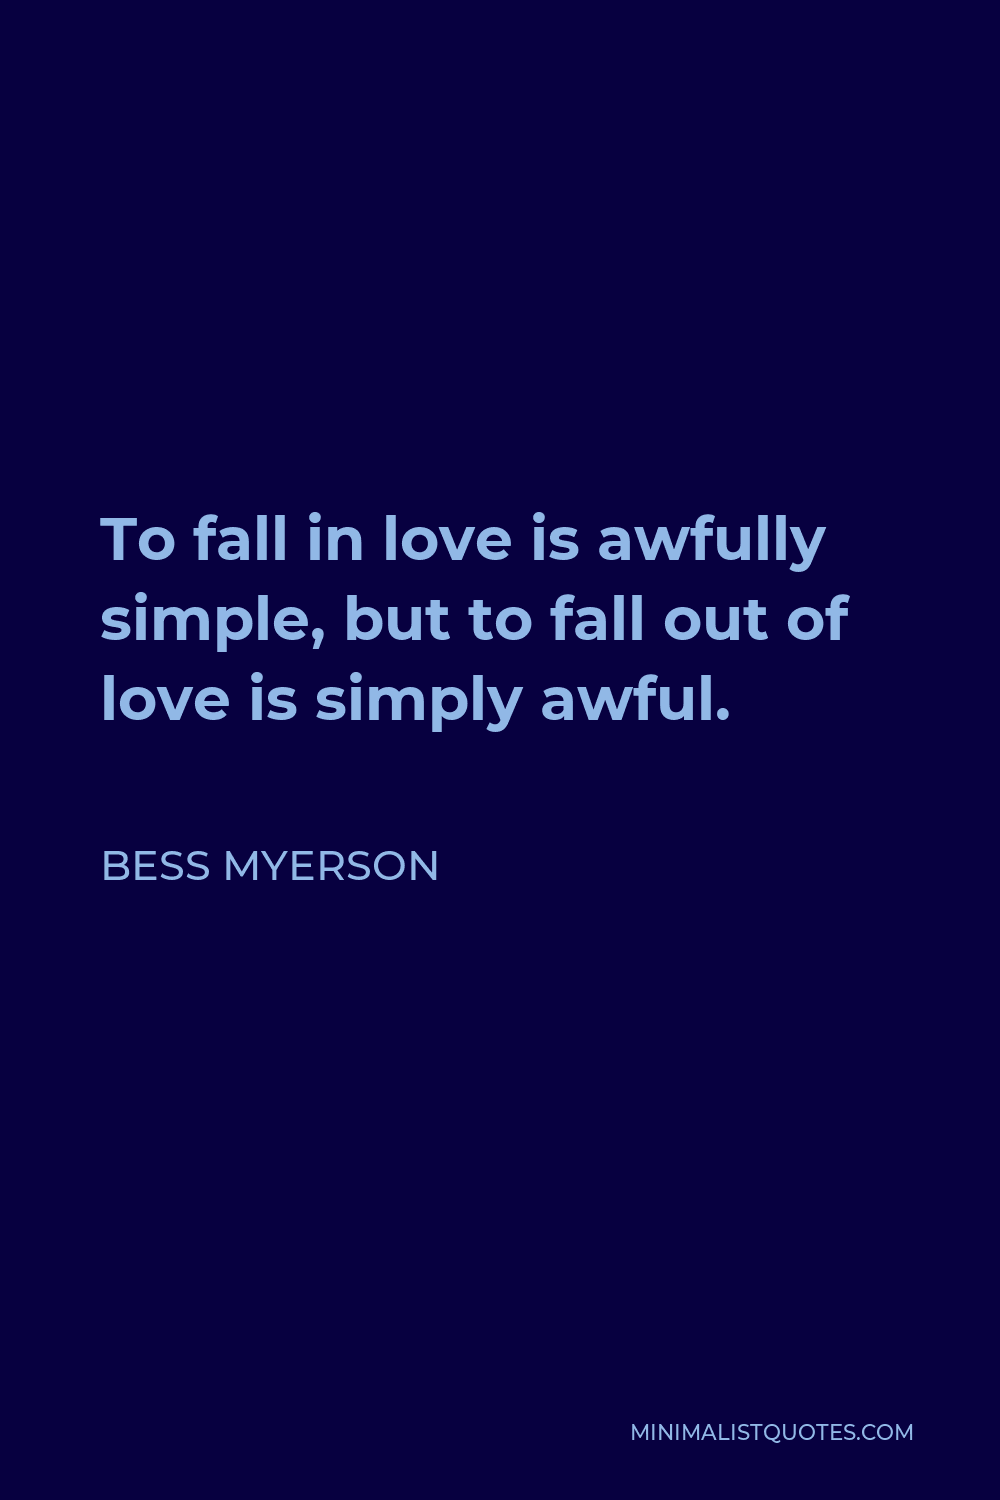 Bess Myerson Quote - To fall in love is awfully simple, but to fall out of love is simply awful.